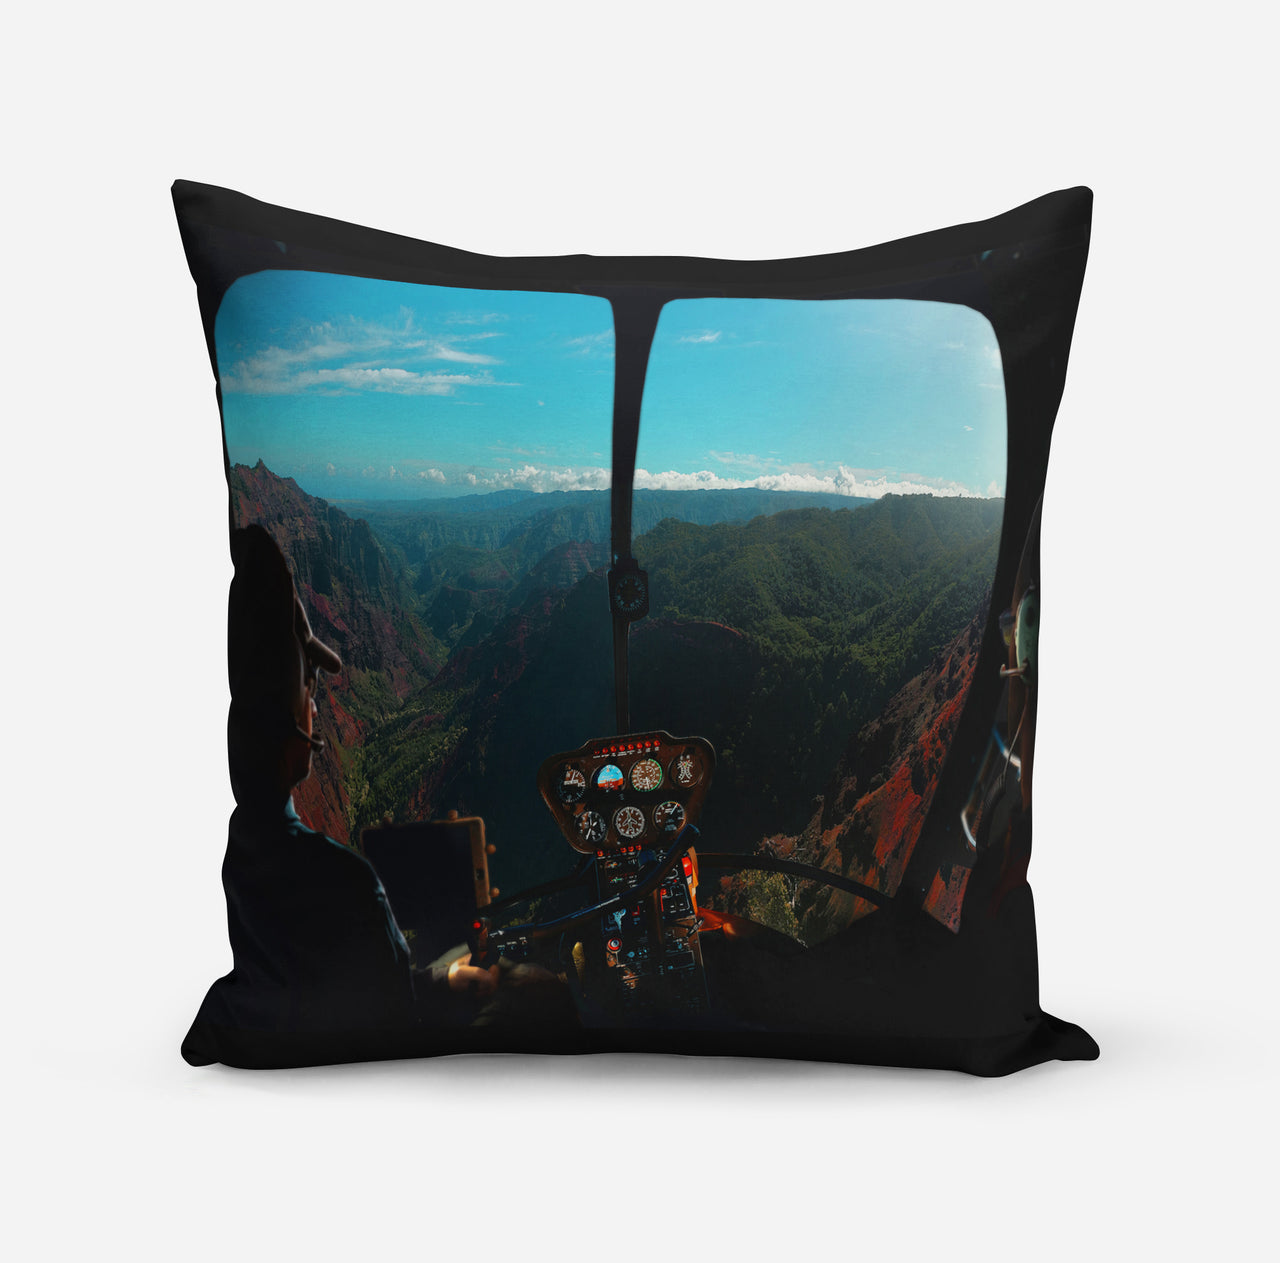 Beautiful Scenary Through Helicopter Cockpit Designed Pillows